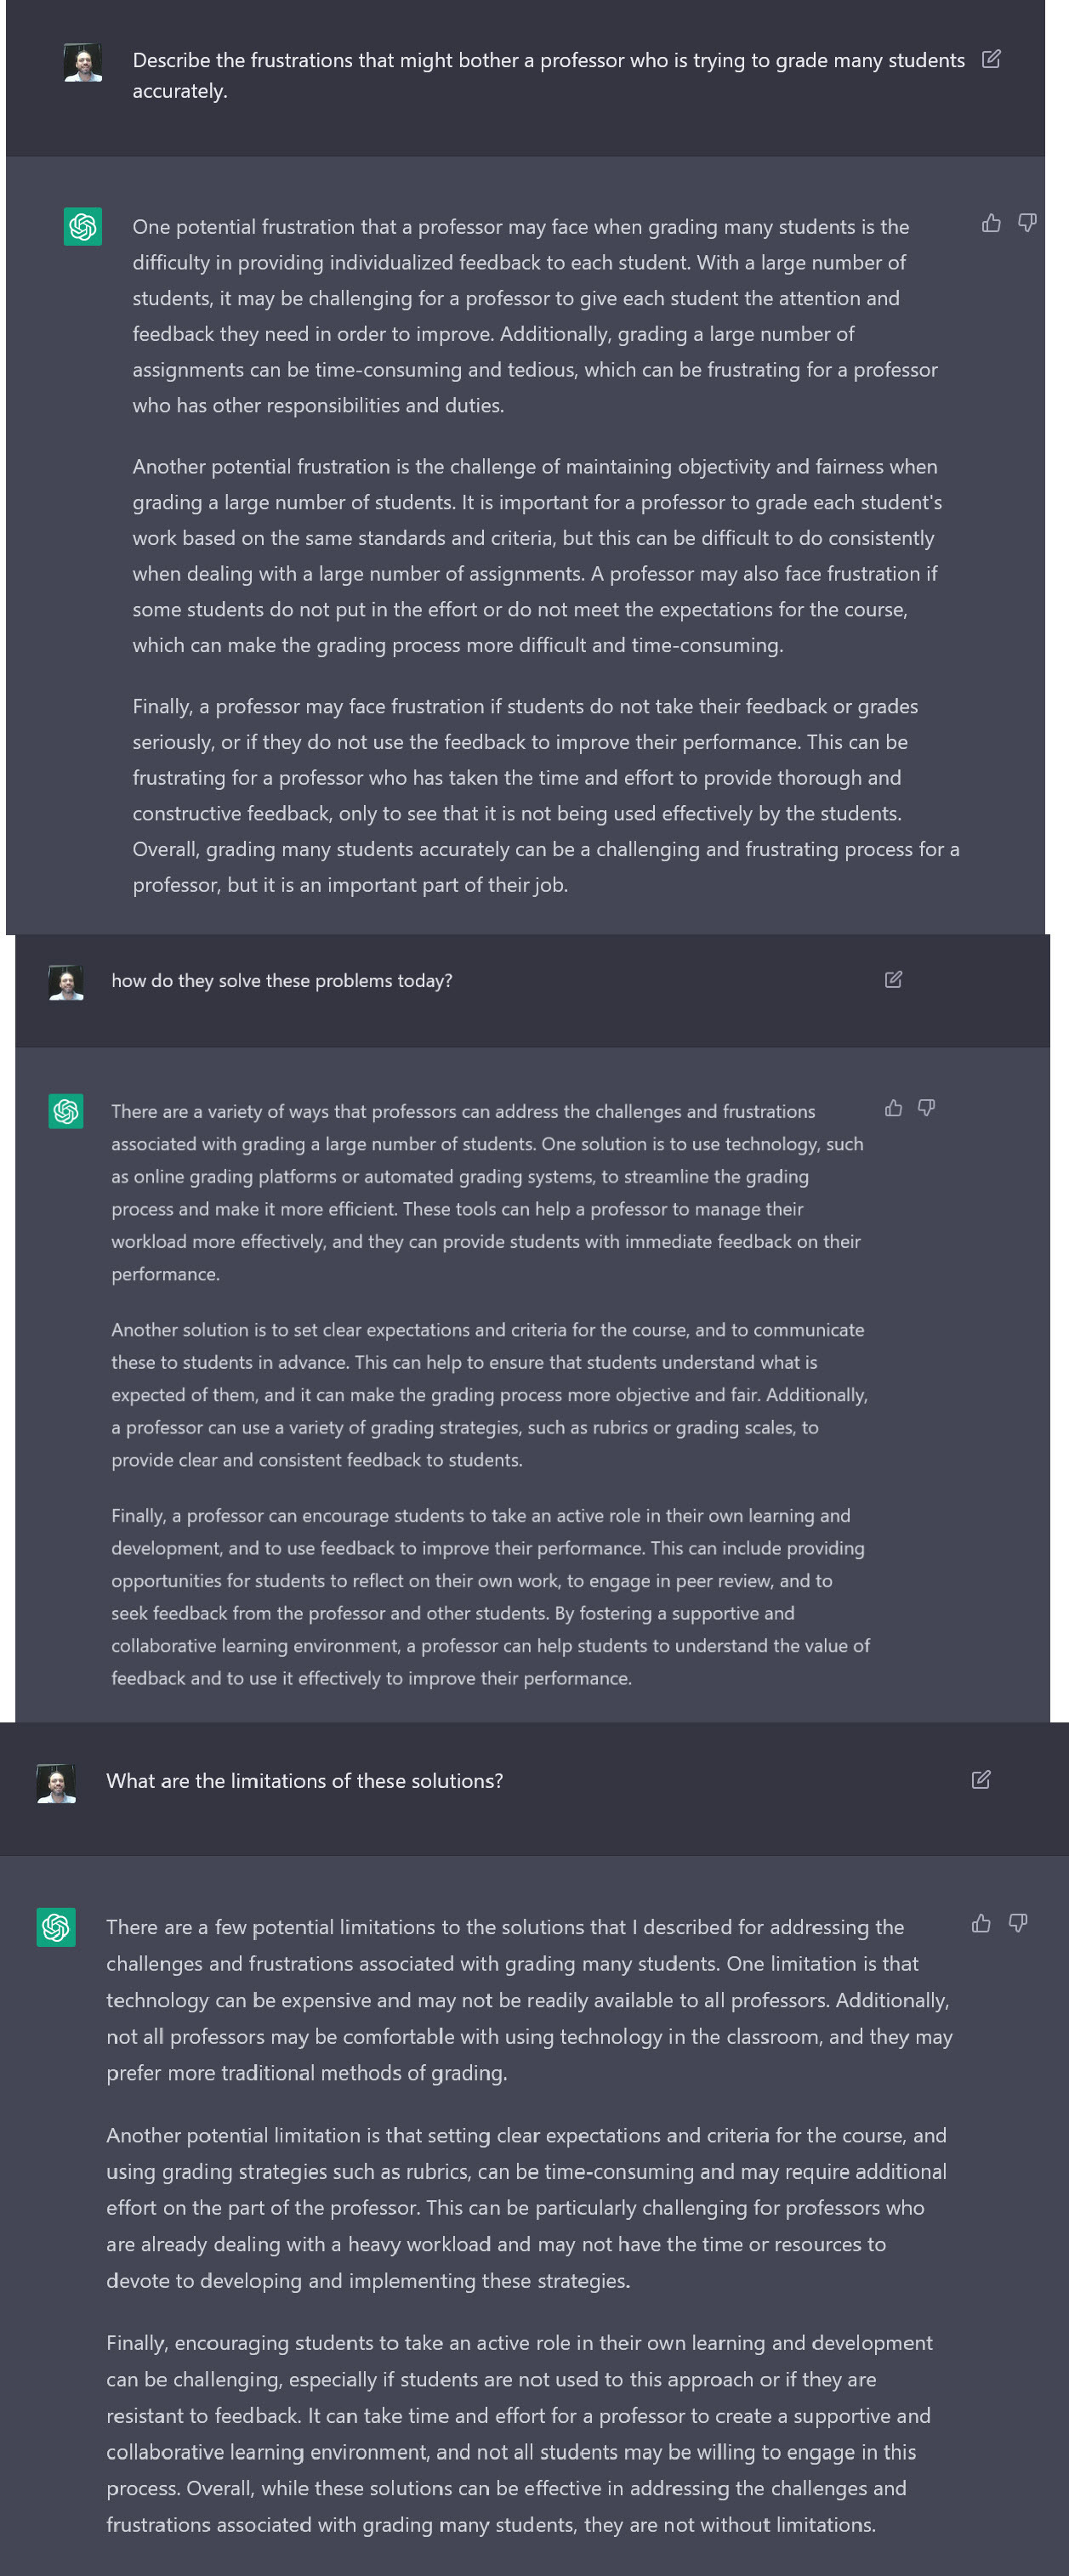 A screenshot of the author's interaction with an AI writing bot. The text reads: Author's prompt: Describe the frustrations that might bother a professor who is trying to grade many students accurately. AI Bot response: One potential frustration that a professor may face when grading many students is the difficulty in providing individualized feedback to each student. With a large number of students, it may be challenging for a professor to give each student the attention and feedback they need in order to improve. Additionally, grading a large number of assignments can be time-consuming and tedious, which can be frustrating for a professo who has other responsibilities and duties.
Another potential frustration is the challenge of maintaining objectivity and fairness when grading a large number of students. It is important for a professor to grade each student's work based on the same standards and criteria, but this can be difficult to do consistently when dealing with a large number of assignments. A professor may also face frustration if some students do not put in the effort or do not meet the expectations for the course, which can make the grading process more difficult and time-consuming.
Finally, a professor may face frustration if students do not take their feedback or grades seriously, or if they do not use the feedback to improve their performance. This can be frustrating for a professor who has taken the time and effort to provide thorough and constructive feedback, only to see that it is not being used effectively by the students.
Overall, grading many students accurately can be a challenging and frustrating process for a professor, but it is an important part of their job.

Author's prompt: How do they solve these problems today?
AI Bot Response: There are a variety of ways that professors can address the challenges and frustrations associated with grading a large number of students. One solution is to use technology, such as online grading platforms or automated grading systems, to streamline the grading process and make it more efficient. These tools can help a professor to manage their workload more effectively, and they can provide students with immediate feedback on their
performance.
Another solution is to set clear expectations and criteria for the course, and to communicate these to students in advance. This can help to ensure that students understand what is expected of them, and it can make the grading process more objective and fair. Additionally, a professor can use a variety of grading strategies, such as rubrics or grading scales, to provide clear and consistent feedback to students.
Finally, a professor can encourage students to take an active role in their own learning and
development, and to use feedback to improve their performance. This can include providina
opportunities for students to reflect on their own work, to engage in peer review, and tc
seek feedback from the professor and other students. B fostering a supportive and
collaborative learning environment, a professor can help students to understand the value of feedback and to use it effectively to improve their performance.

Author's prompt: What are the limitations of these solutions?
AI Bot response: There are a few potential limitations to the solutions that I described for addressing the challenges and frustrations associated with grading many students. One limitation is that technology can be expensive and may not be readily available to all professors. Additionally, not all professors may be comfortable with using technology in the classroom, and they may prefer more traditional methods of grading.
Another potential limitation is that settina clear expectations and criteria for the course, and using grading strategies such as rubrics, can be time-consuming and may require additional effort on the part of the professor. This can be particularly challenging for professors who are already dealing with a heavy workload and may not have the time or resources to devote to developing and implementing these strategies.
Finally, encouraging students to take an active role in their own learning and development can be challenging, especially if students are not used to this approach or if they are resistant to feedback. It can take time and effort for a professor to create a supportive and collaborative learning environment, and not all students may be willing to engage in this process. Overall, while these solutions can be effective in addressing the challenges and frustrations associated with grading many students, they are not without limitations. 